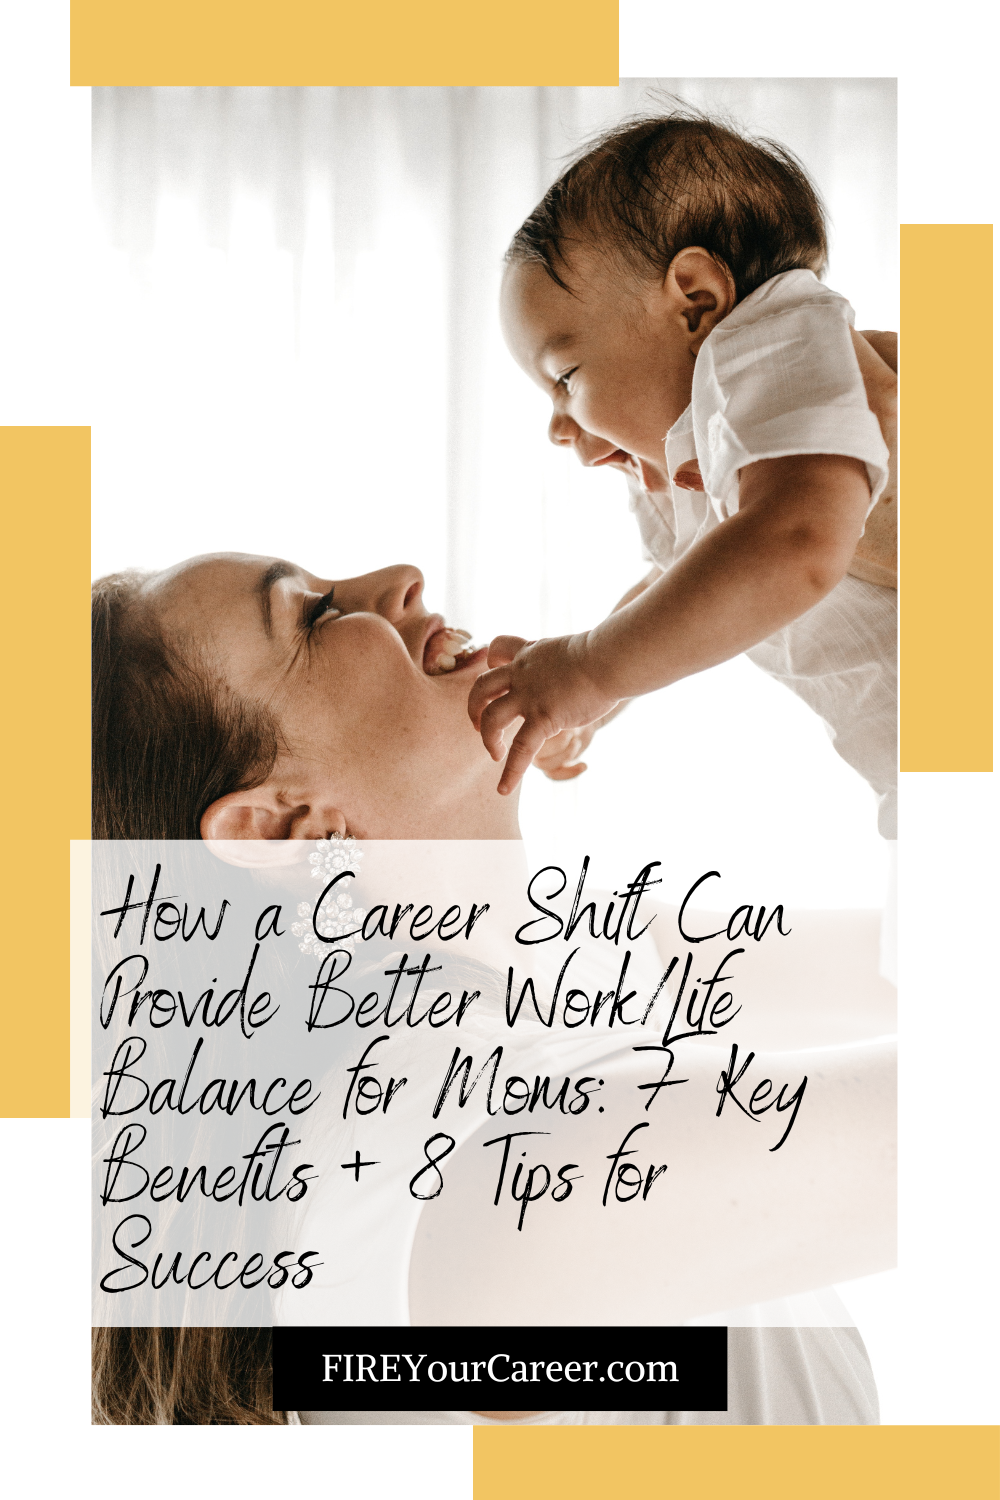 How a Career Shift Can Provide Better WorkLife Balance for Moms 7 Key Benefits + 8 Tips for Success Pinterest